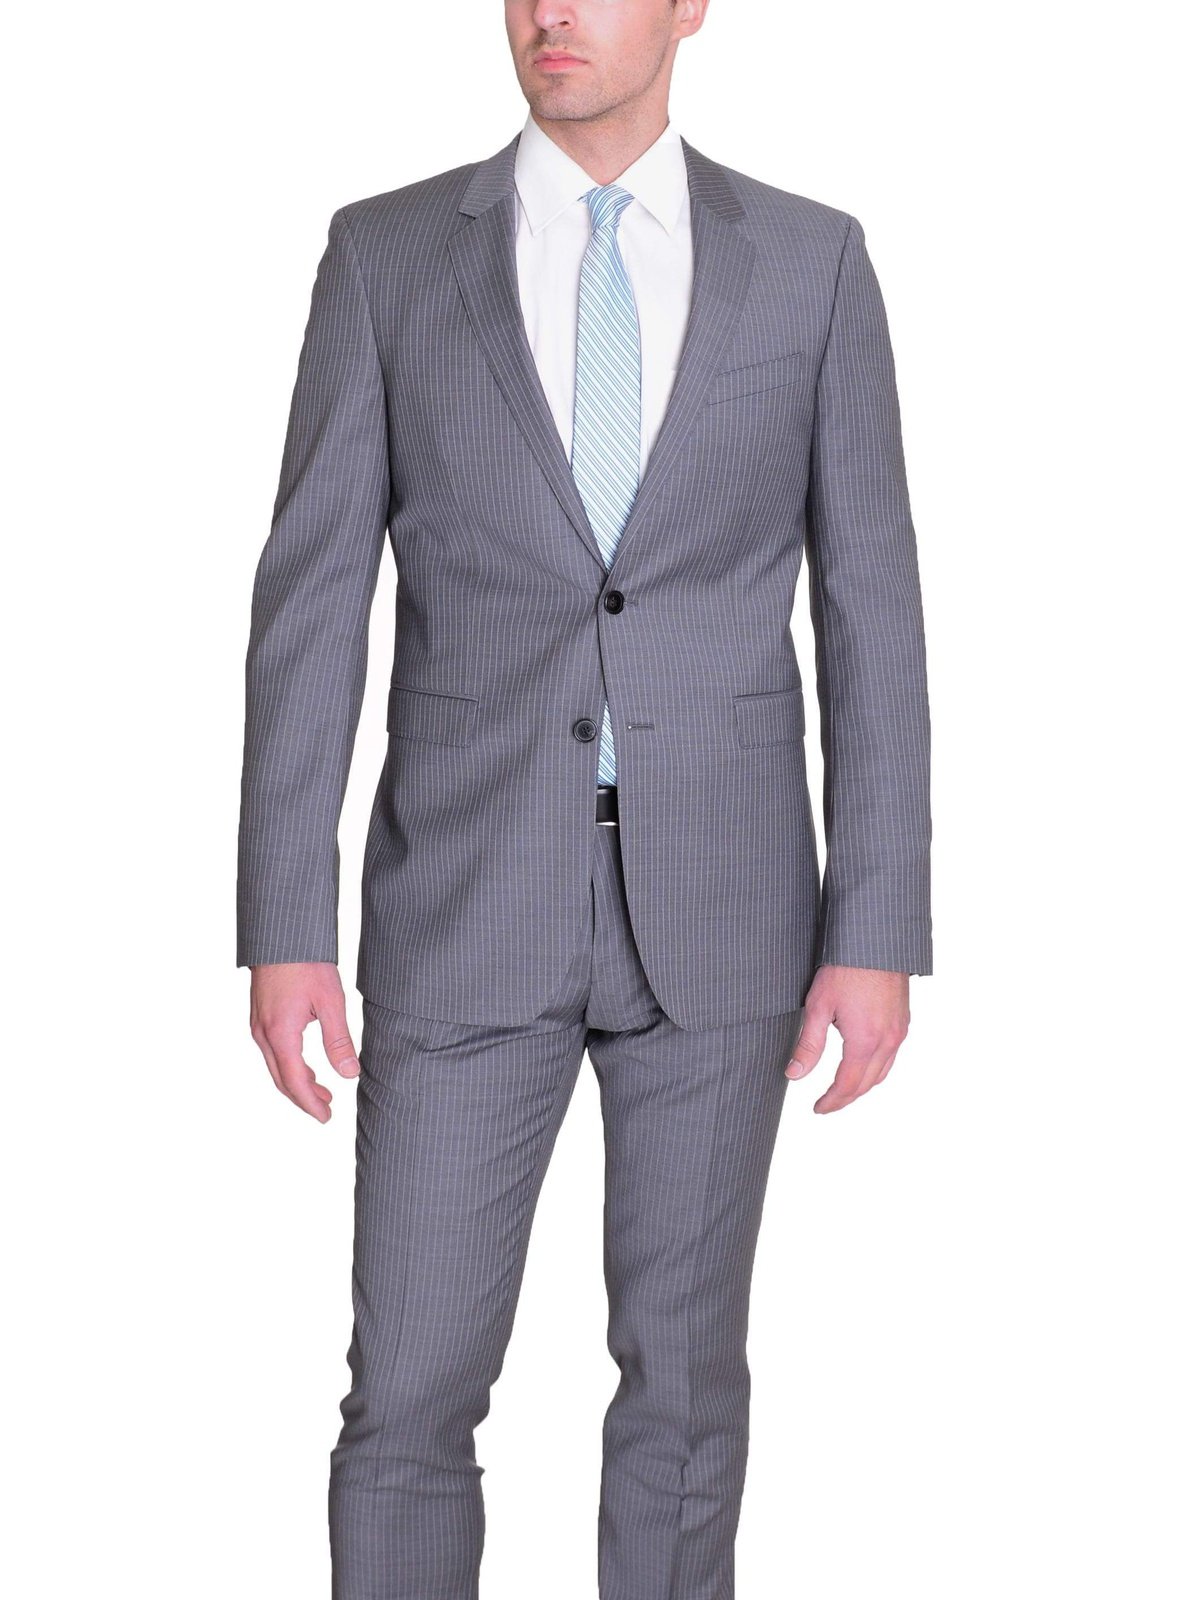 HUGO BOSS TWO PIECE SUITS 42S Hugo Boss Inwood/Winfield_1 Slim Fit Gray Striped Two Button Wool Suit